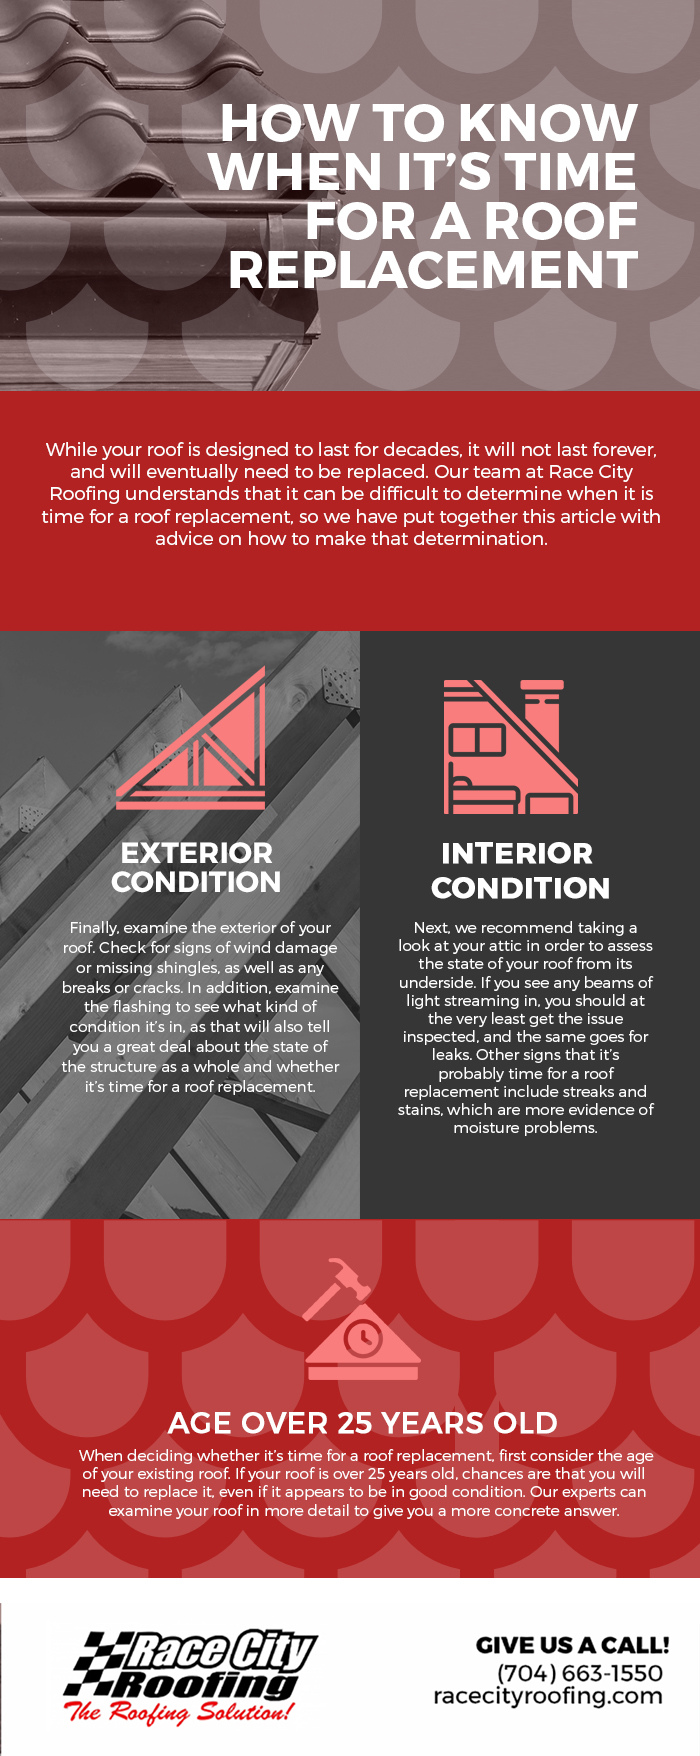 How to Know When it’s Time for a Roof Replacement [infographic]